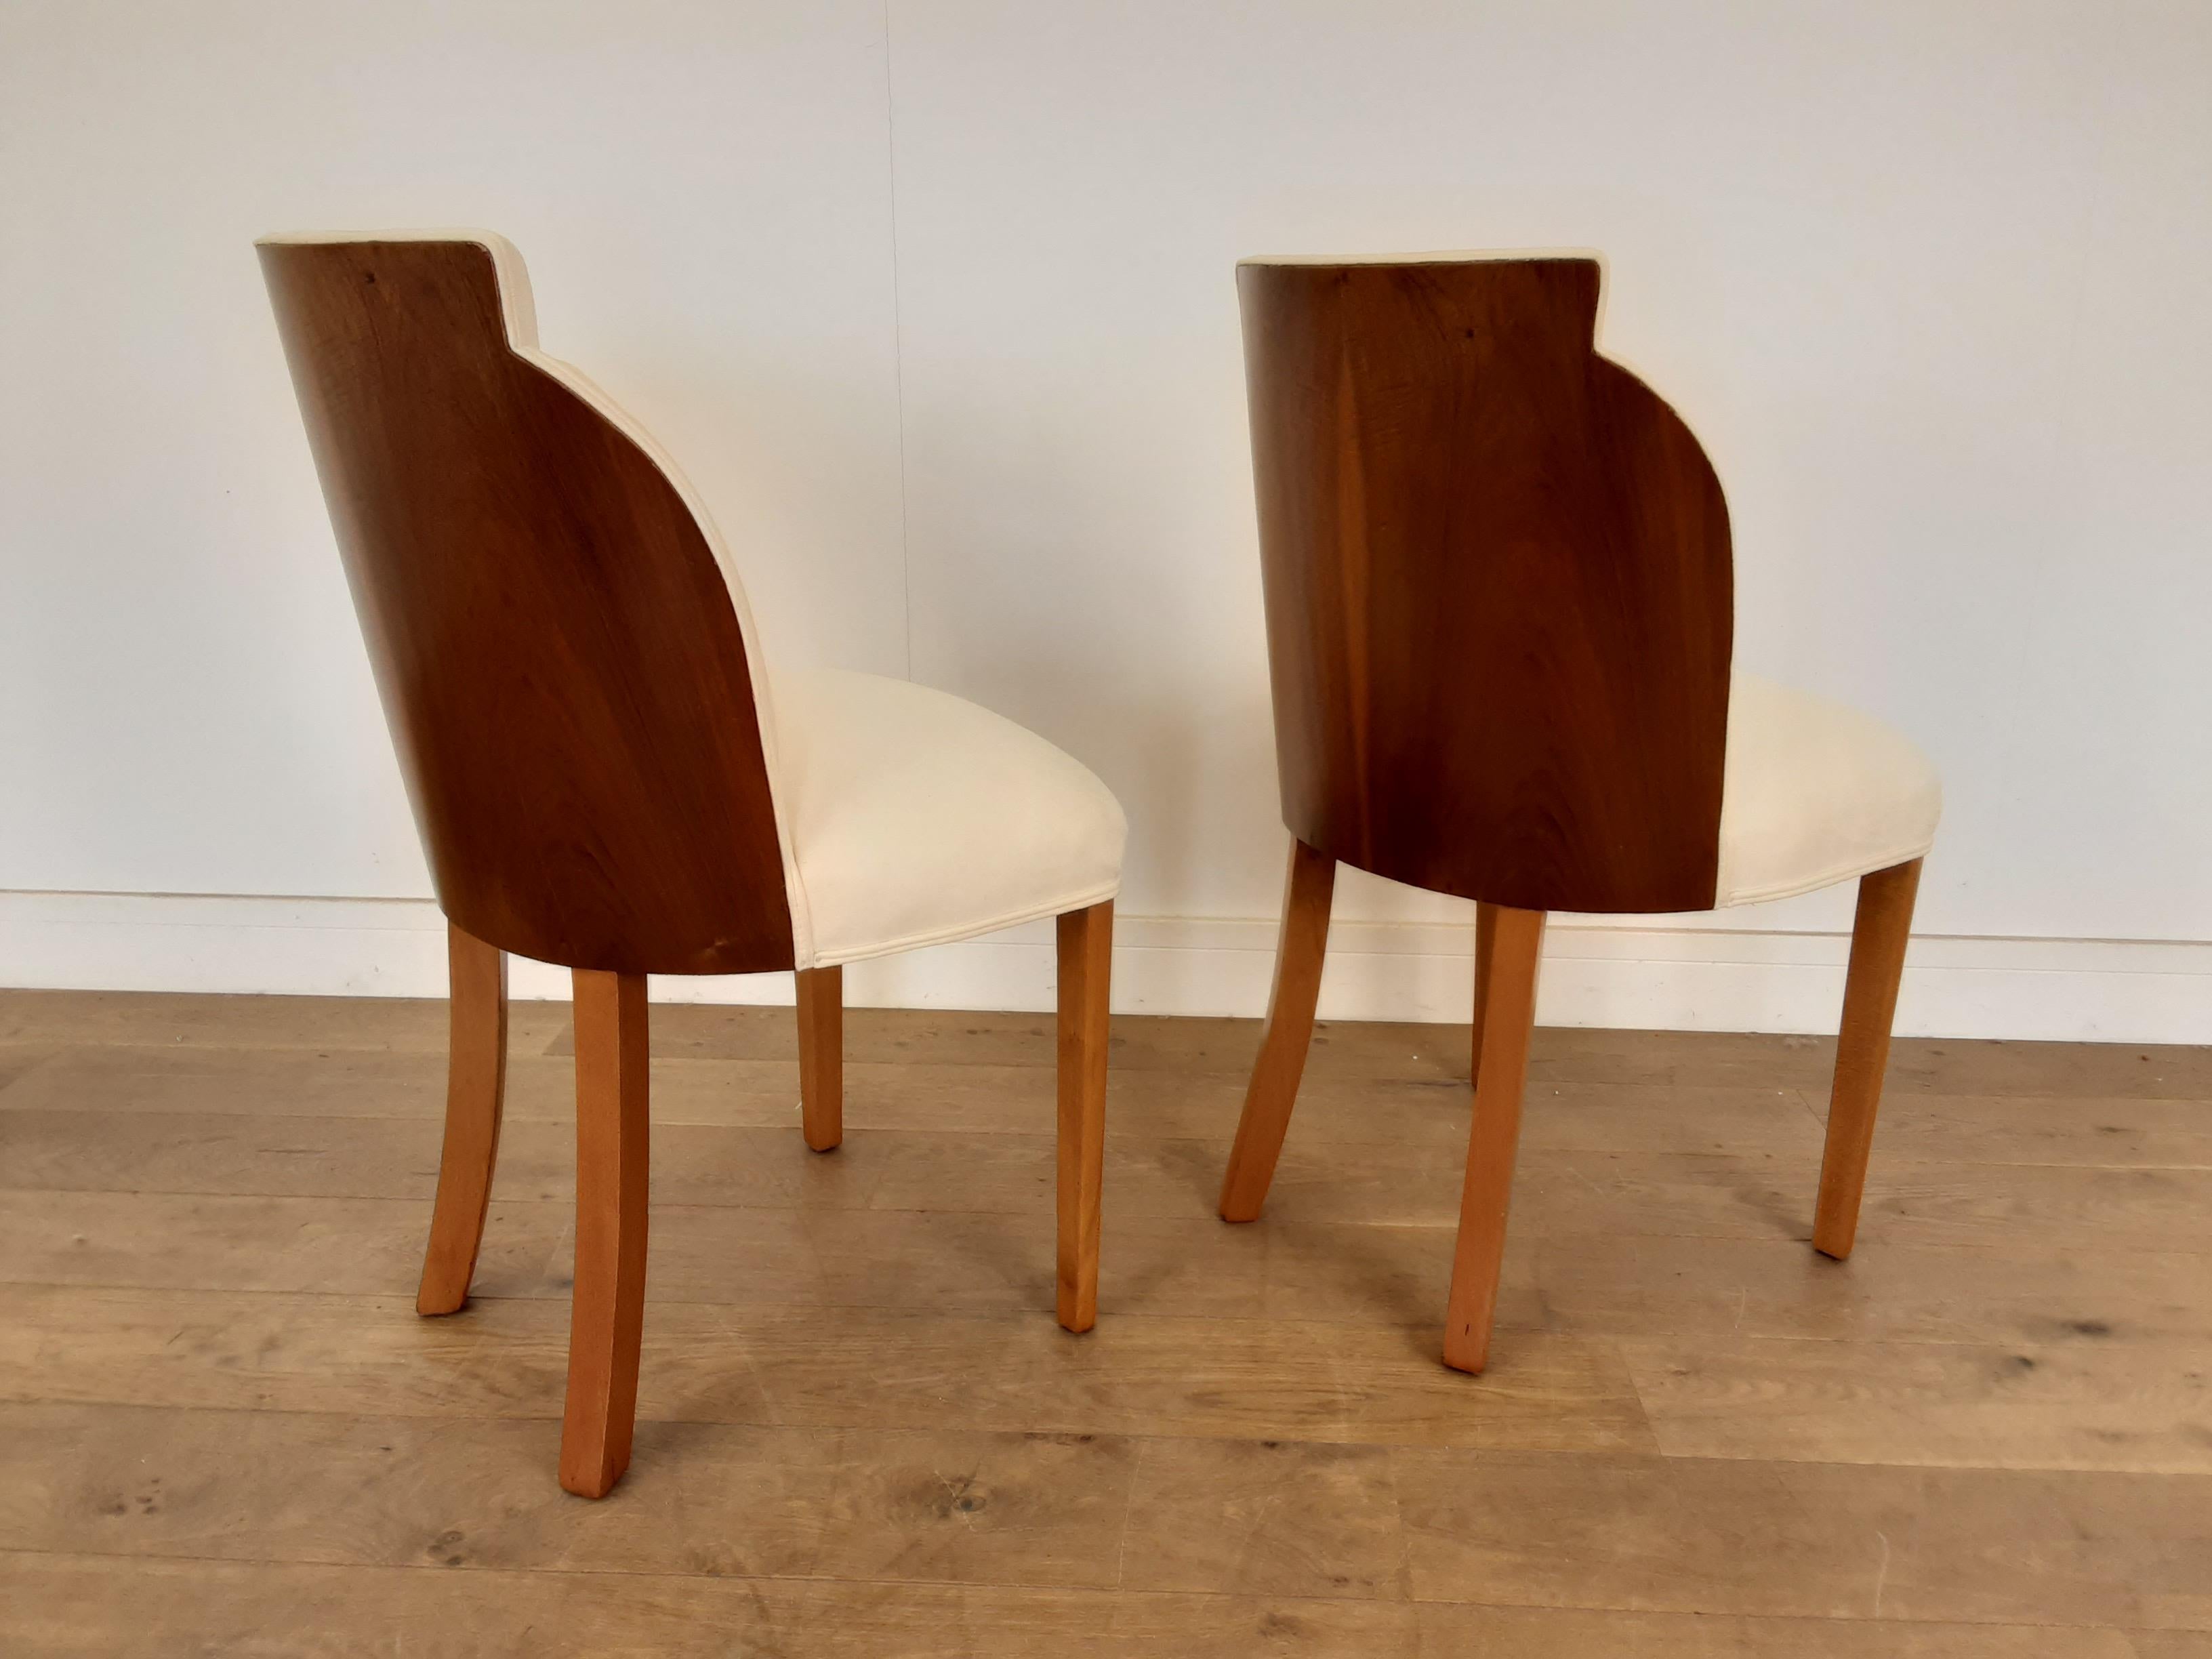 20th Century Pair of Art Deco Cloud Back Chairs in Walnut by Epstein, circa 1930 For Sale